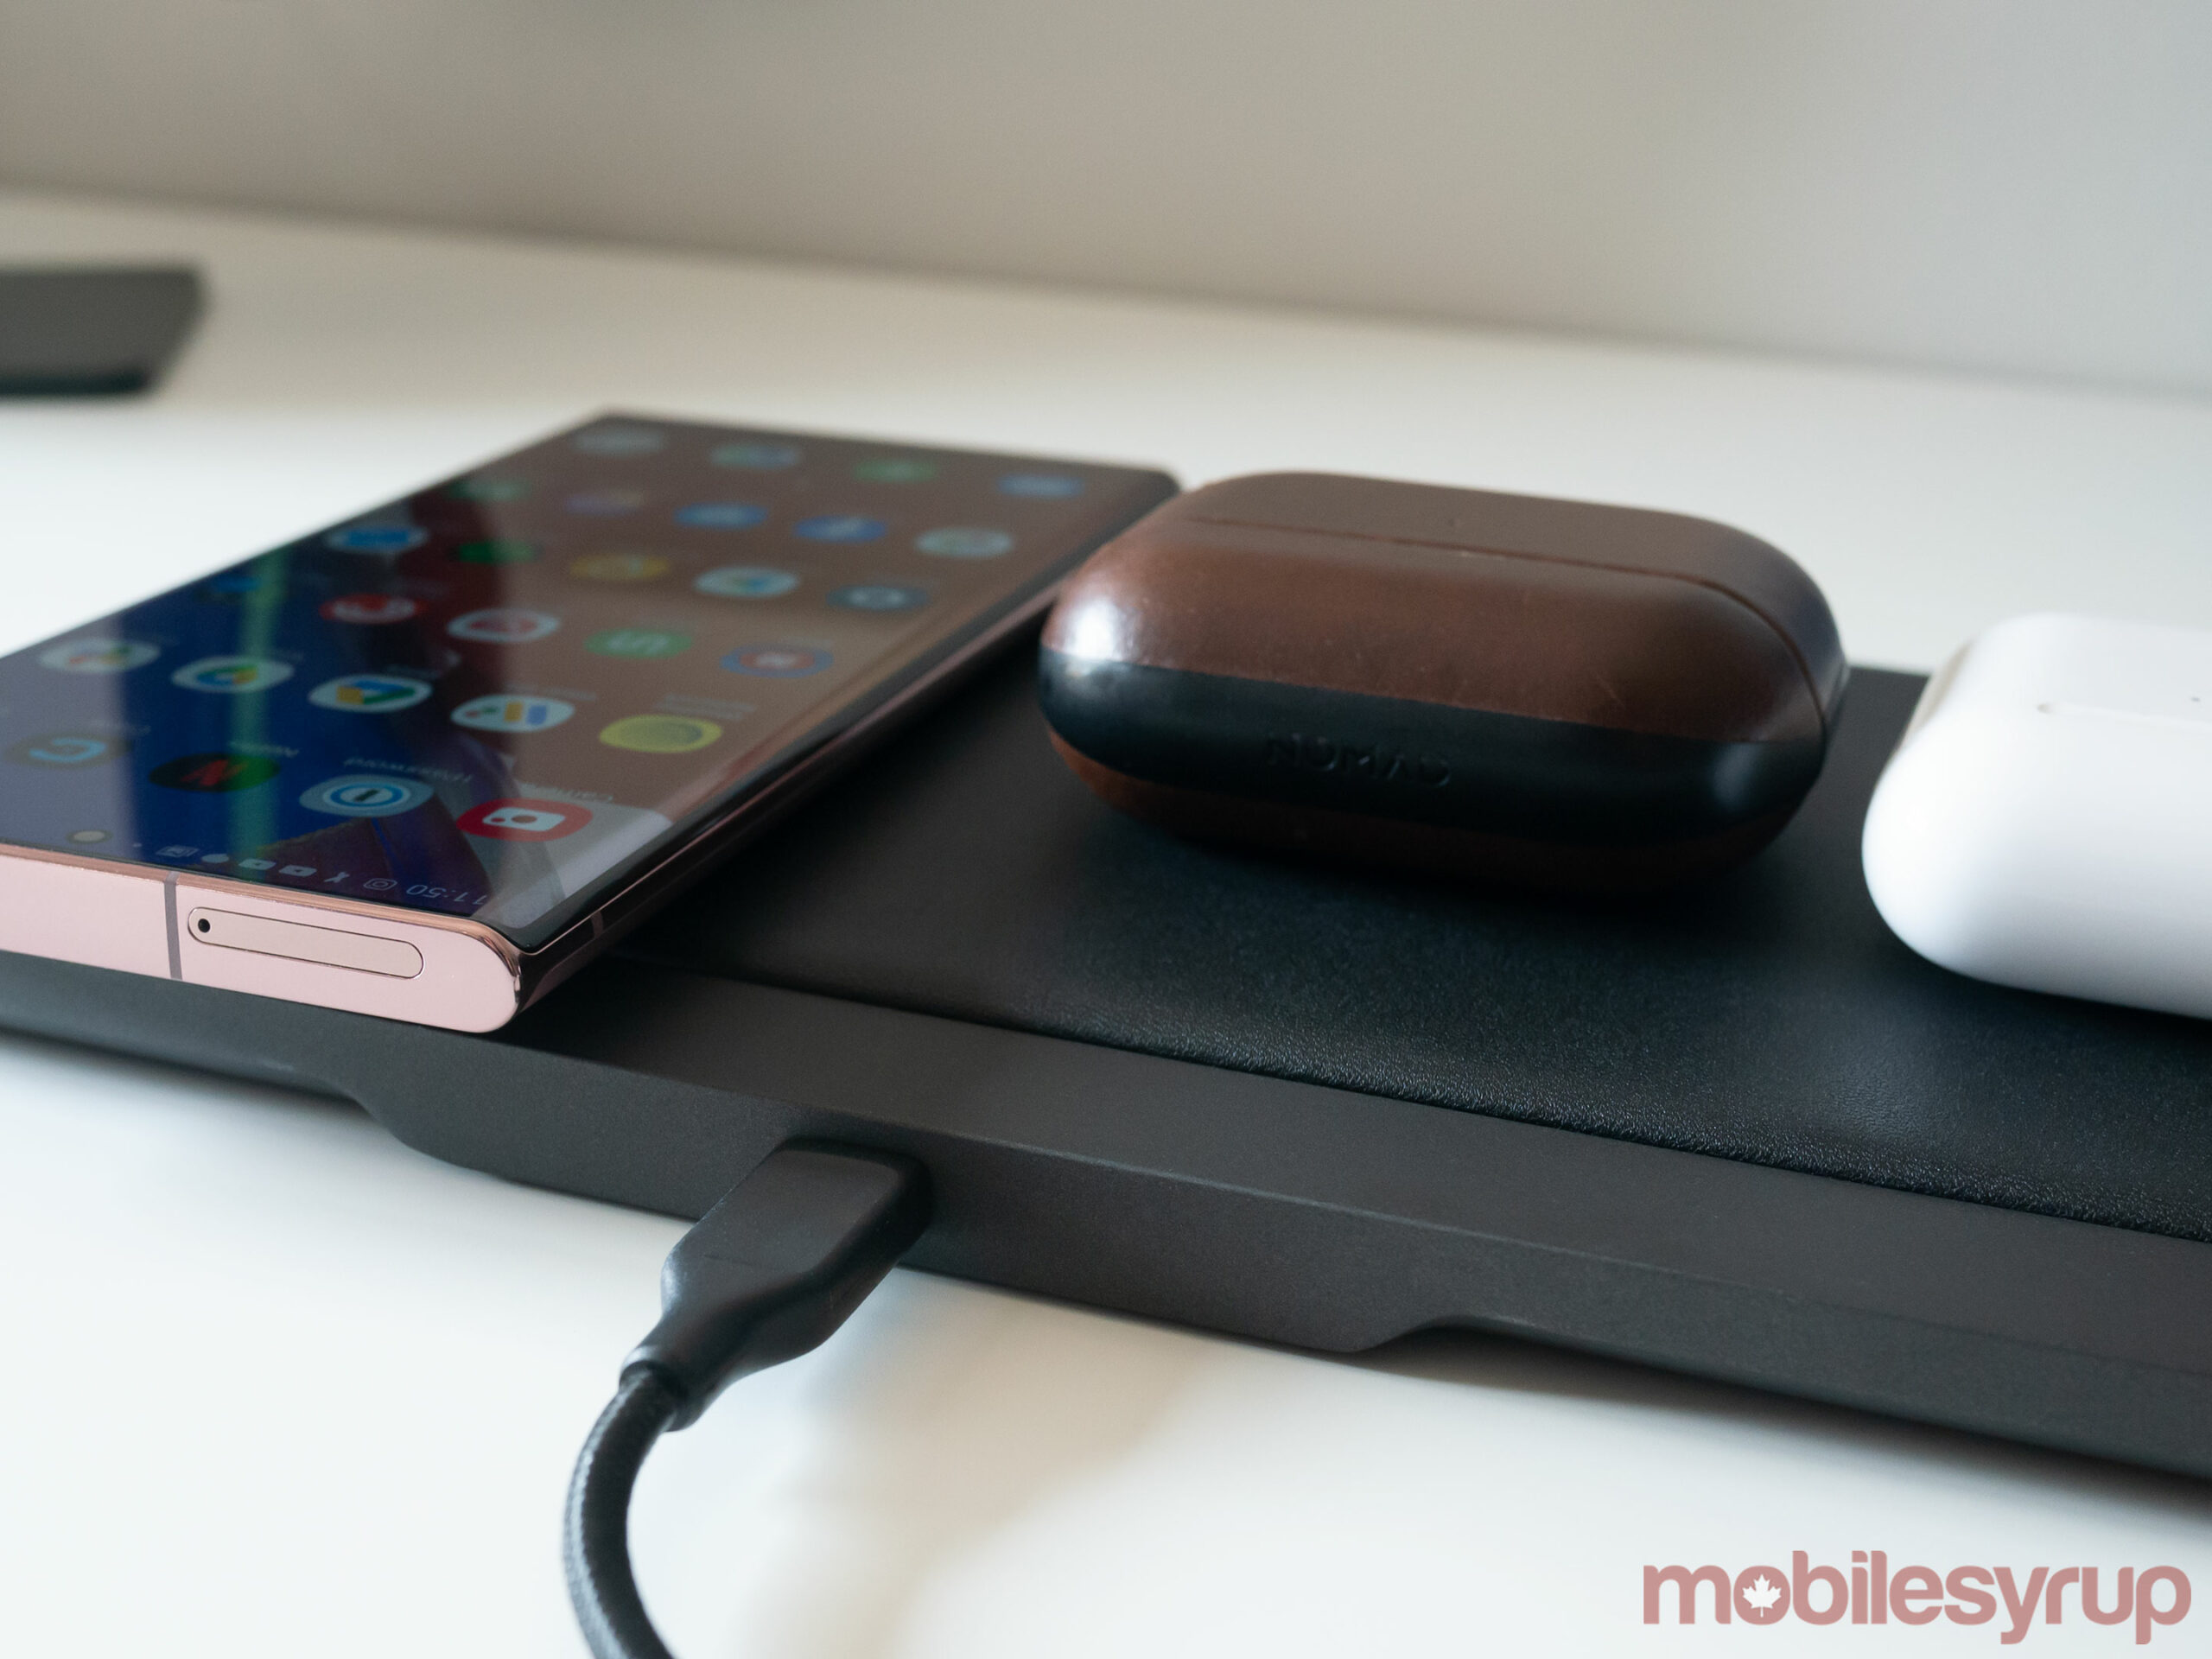 Nomad's Base Station Pro almost fills the void left by Apple's 